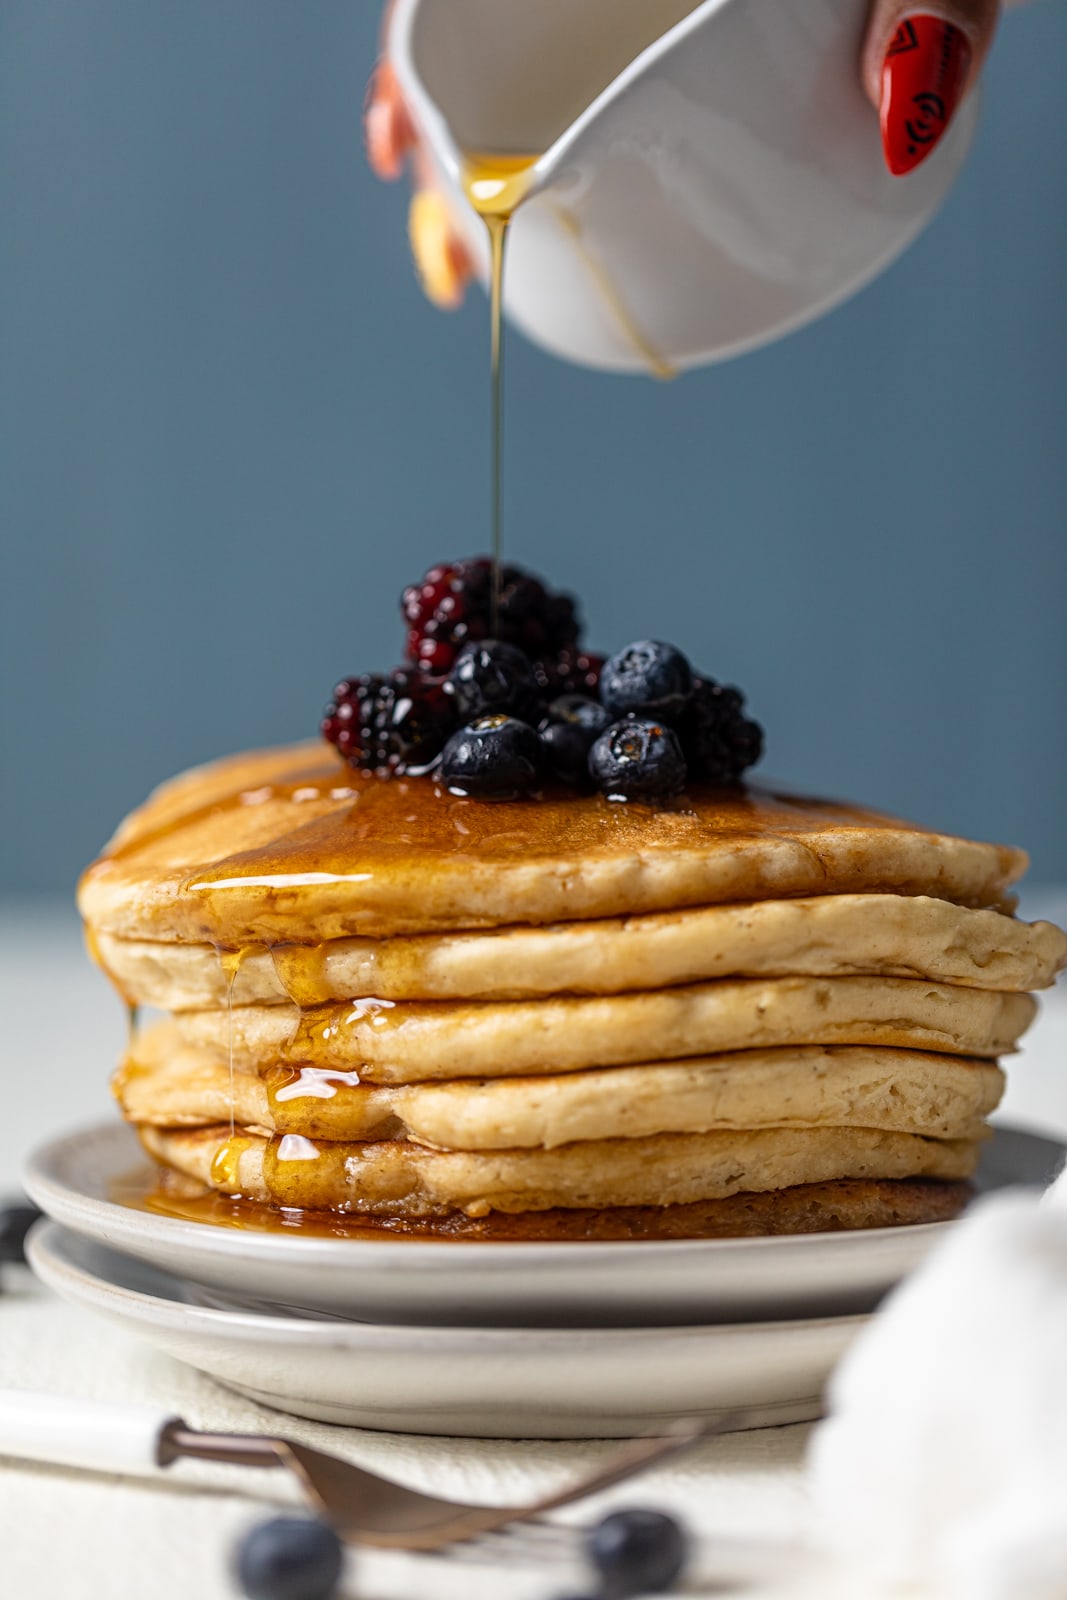 Syrup pouring onto a stack of pancakes